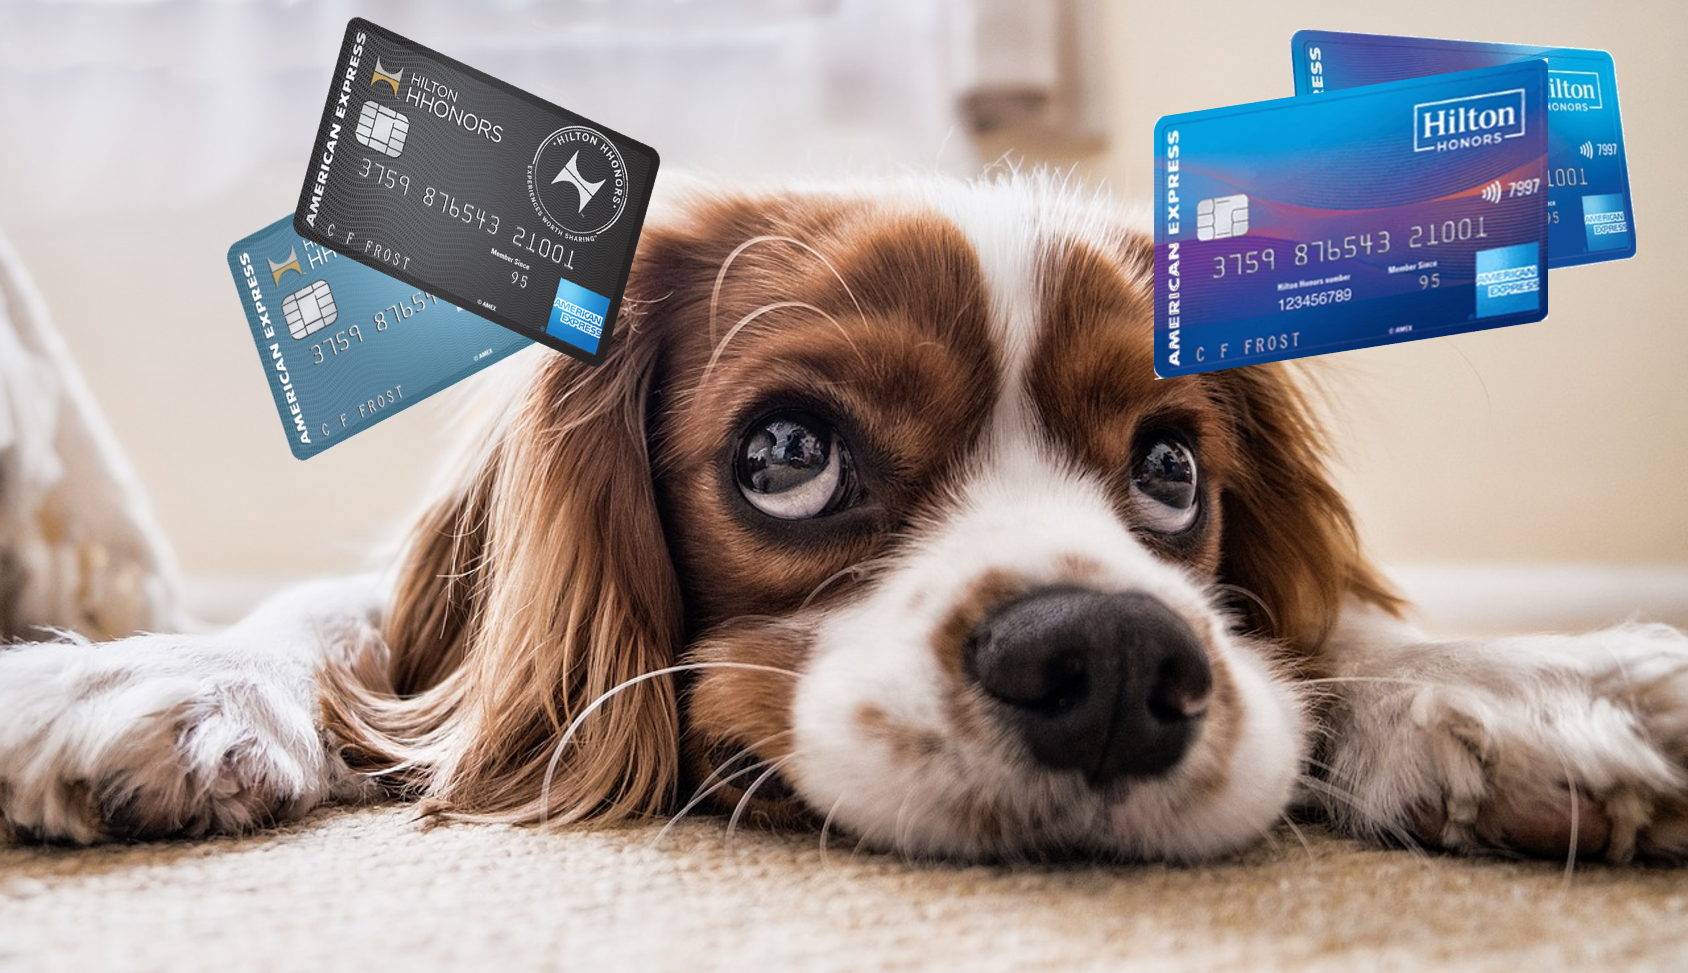 a dog lying on the floor with credit cards above its head